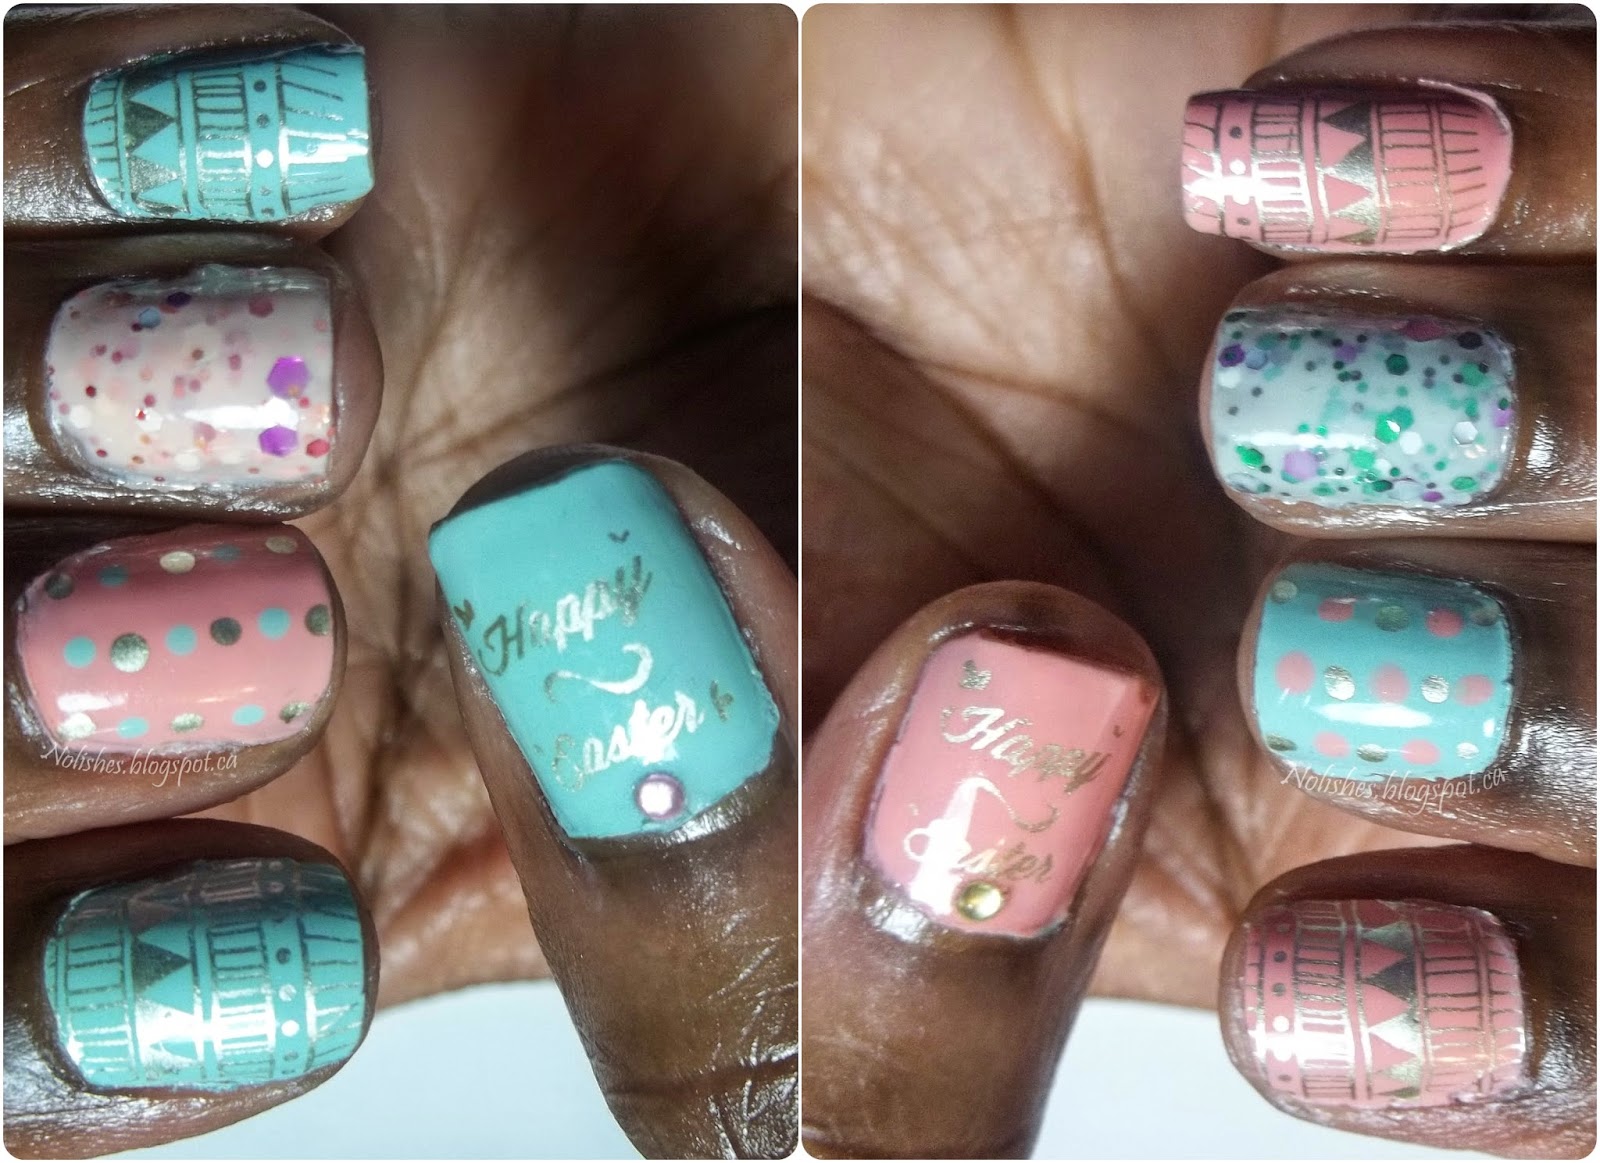 Pastel pink and green nail stamping manicure. Left hand has light green base polish on thumb, pinky and index. Pinky and index are stamped in with tribal geometric design, and thumb is stamped with Happy Easter (all stamping is in gold). Ring finger has light pink polish with suspended glitter, and middle finger has a light pink creme polish. I made dots of green and gold polish on the middle finger.  Right hand is the opposite (switching light green for pink in all cases).